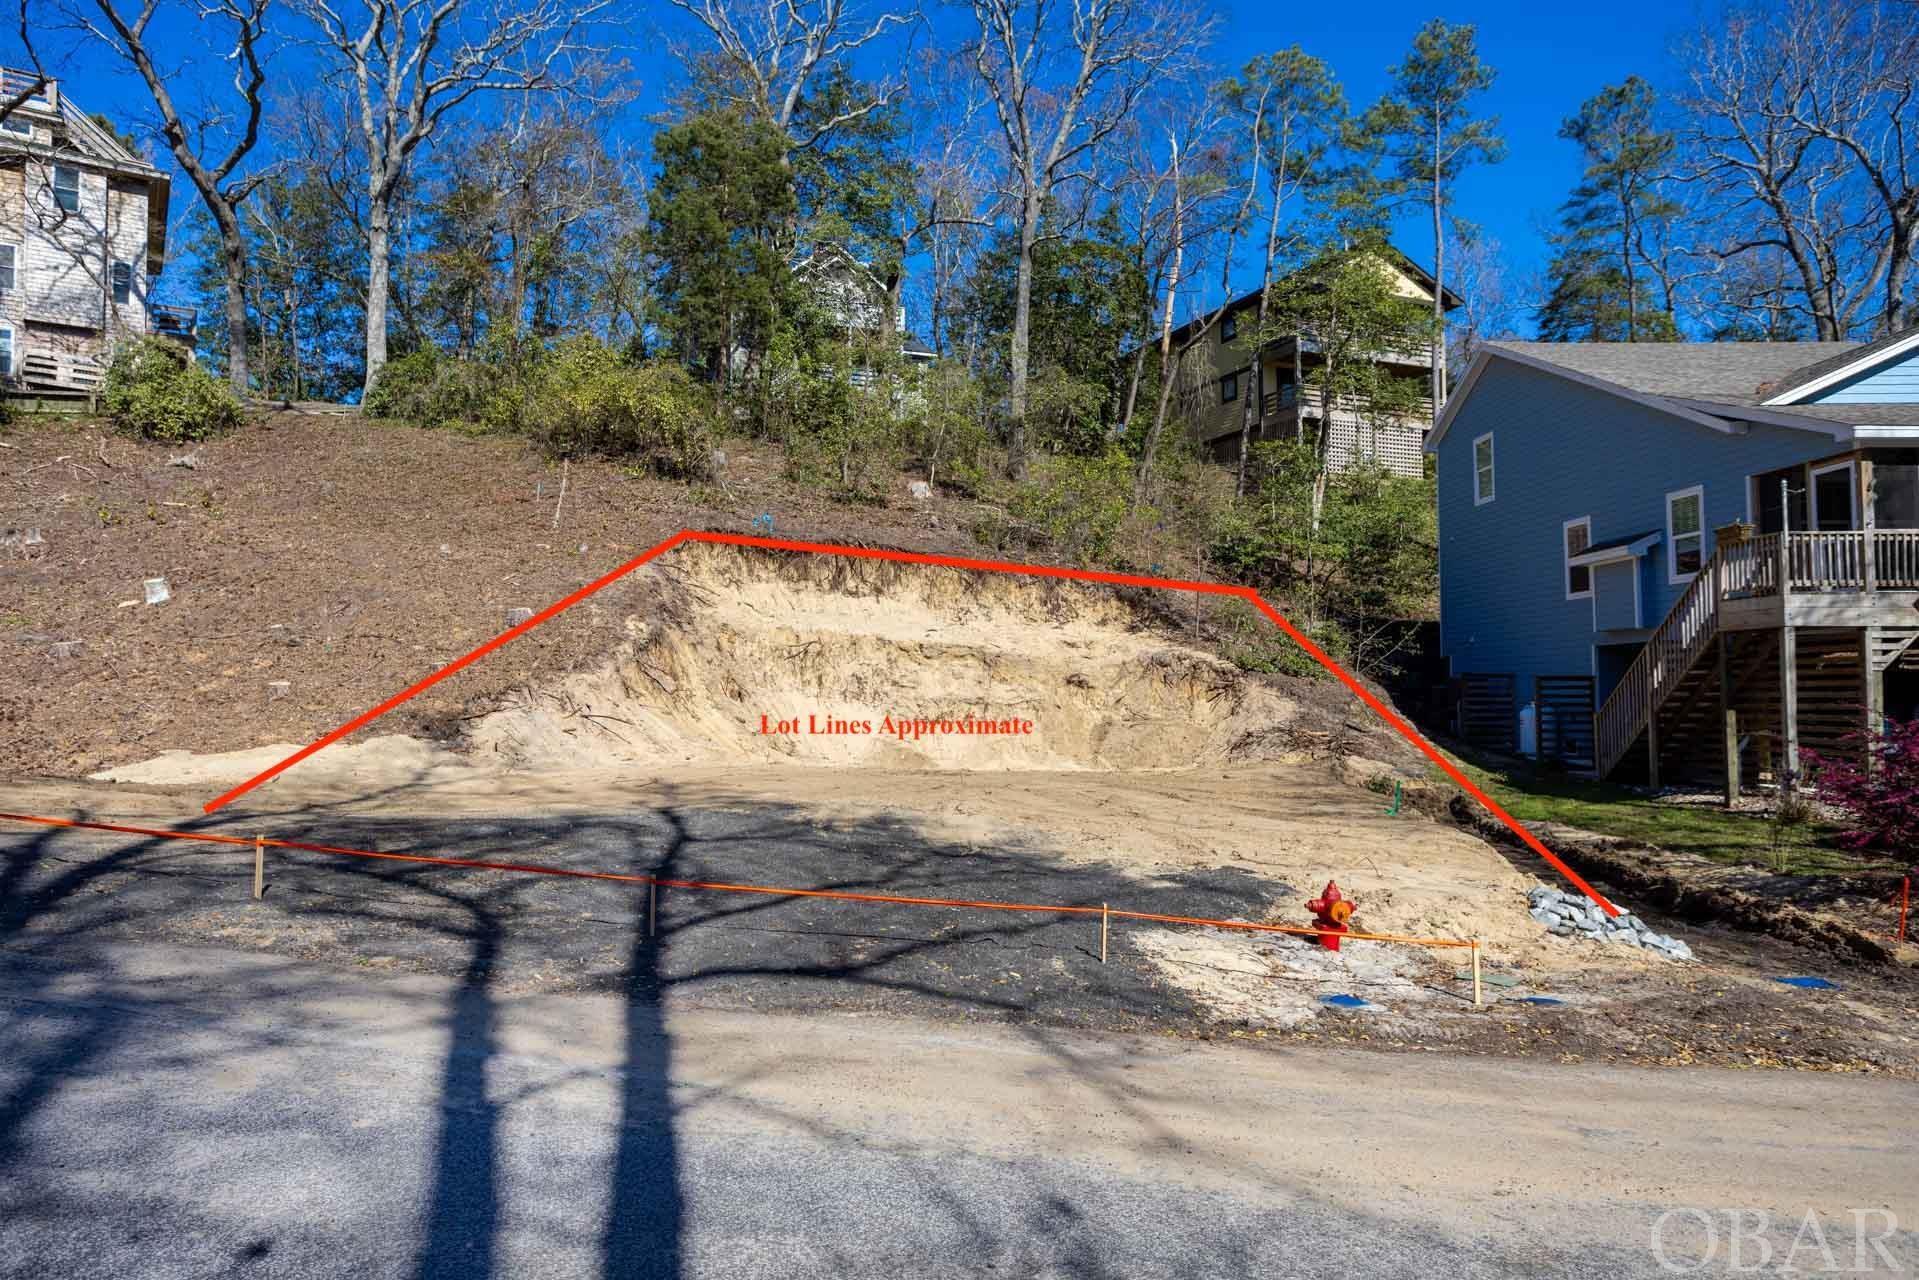 EXCAVATED AND READY-TO-BUILD lot in the sought-after Bay Cliff Community just beyond the Wright Brothers Memorial. This gated soundfront community is a quiet peaceful haven on the Outer Banks. This unique opportunity sits high and dry on an X flood zone area and allows a build with a minimum of 1,600 sqft. Your dreams are limitless as you design and create the space that works best for you and your family. This best-kept secret is in perfect proximity to beach accesses as well as, the tranquility of the Albemarle Sound. This lot facing the west offers the most stunning sunsets imaginable! Picture cotton candy skies while sipping an evening cocktail or cup of coffee off of your front porch. Not only are you close to the beach but so much more! Head to local Seafood markets, restaurants, and bars. Let's talk community! The Baycliff community has everything you need: security with the guard gate, privacy with the lush vegetation, high elevations, and community amenities. The community amenities do not lack! They include a lovely soundfront pool and clubhouse, a gazebo, a fitness center, and a boat ramp with sound access for a minimal fee. Land is precious and will eventually run out on this beautiful island. Don't miss out on this amazing opportunity to build your dream Outer Banks home in the Baycliff community.